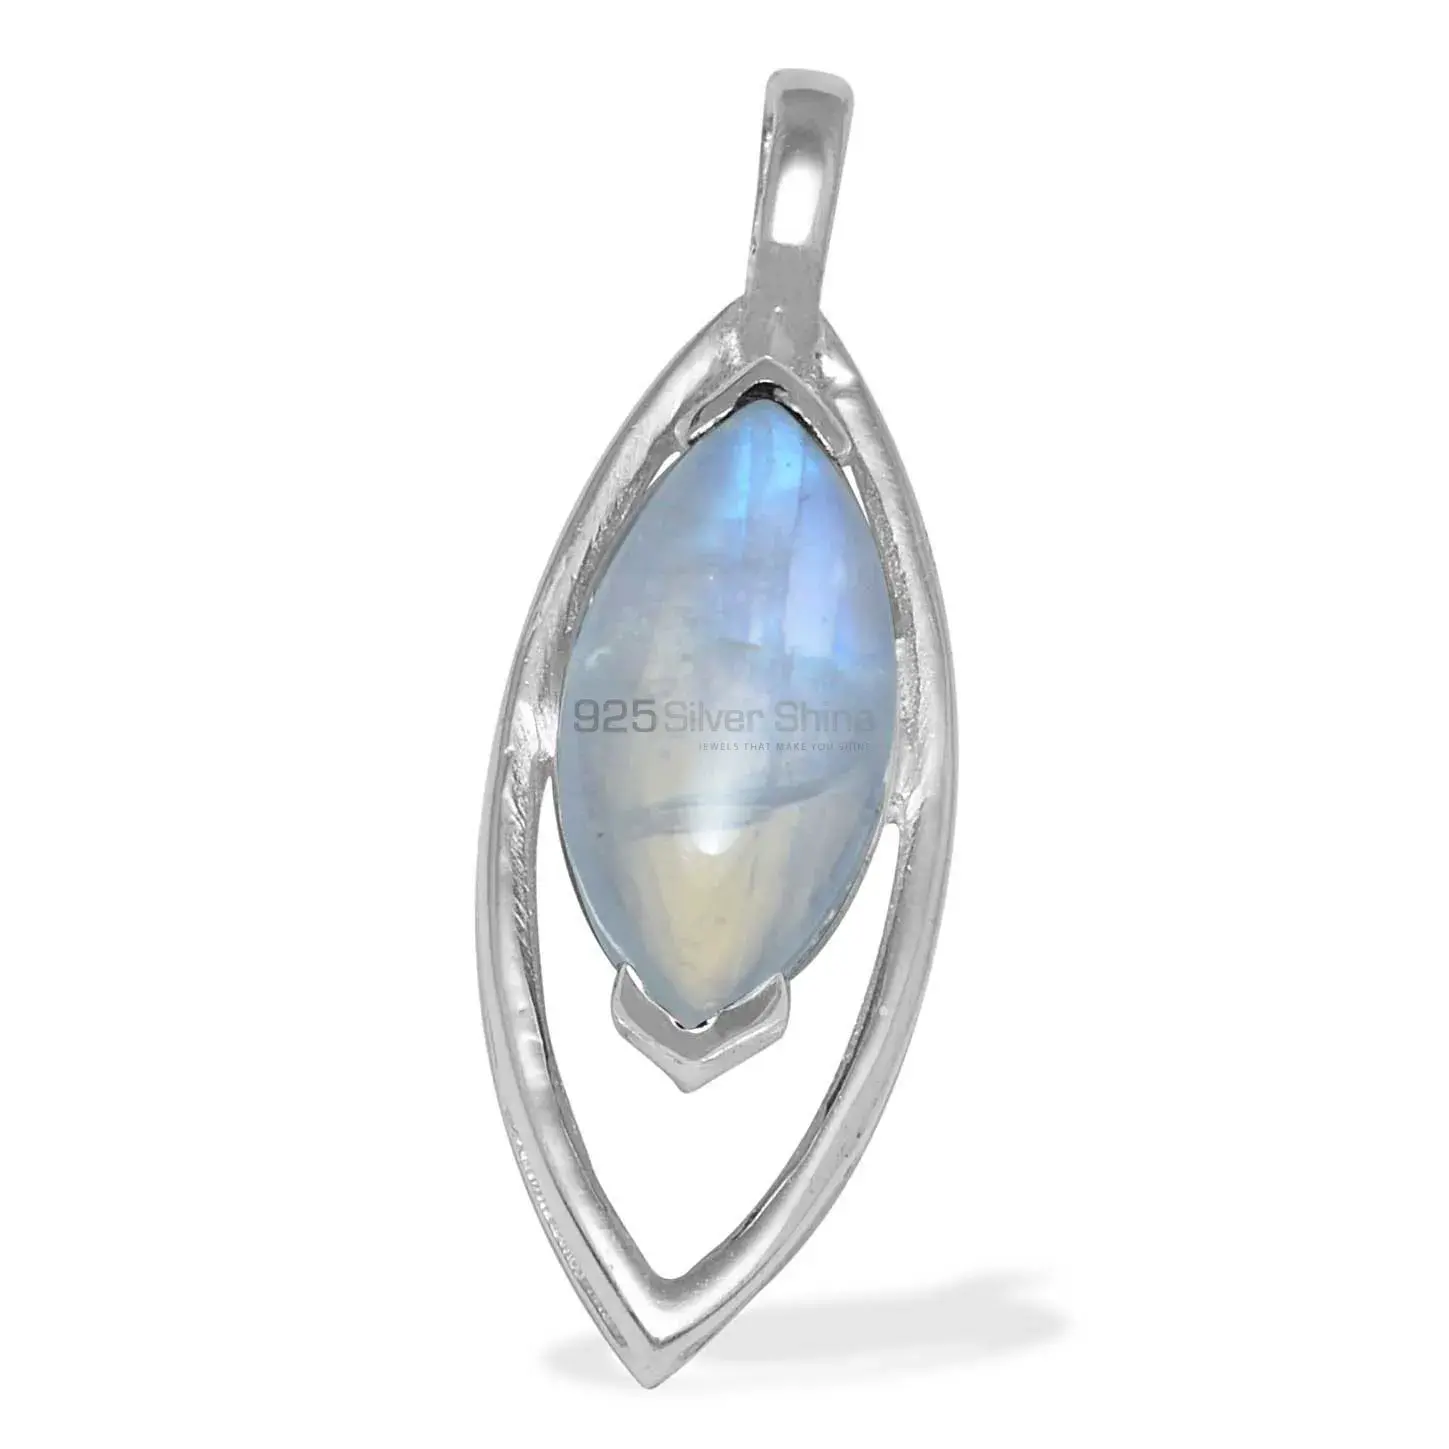 High Quality 925 Fine Silver Pendants Suppliers In Rainbow Moonstone Jewelry 925SP1480